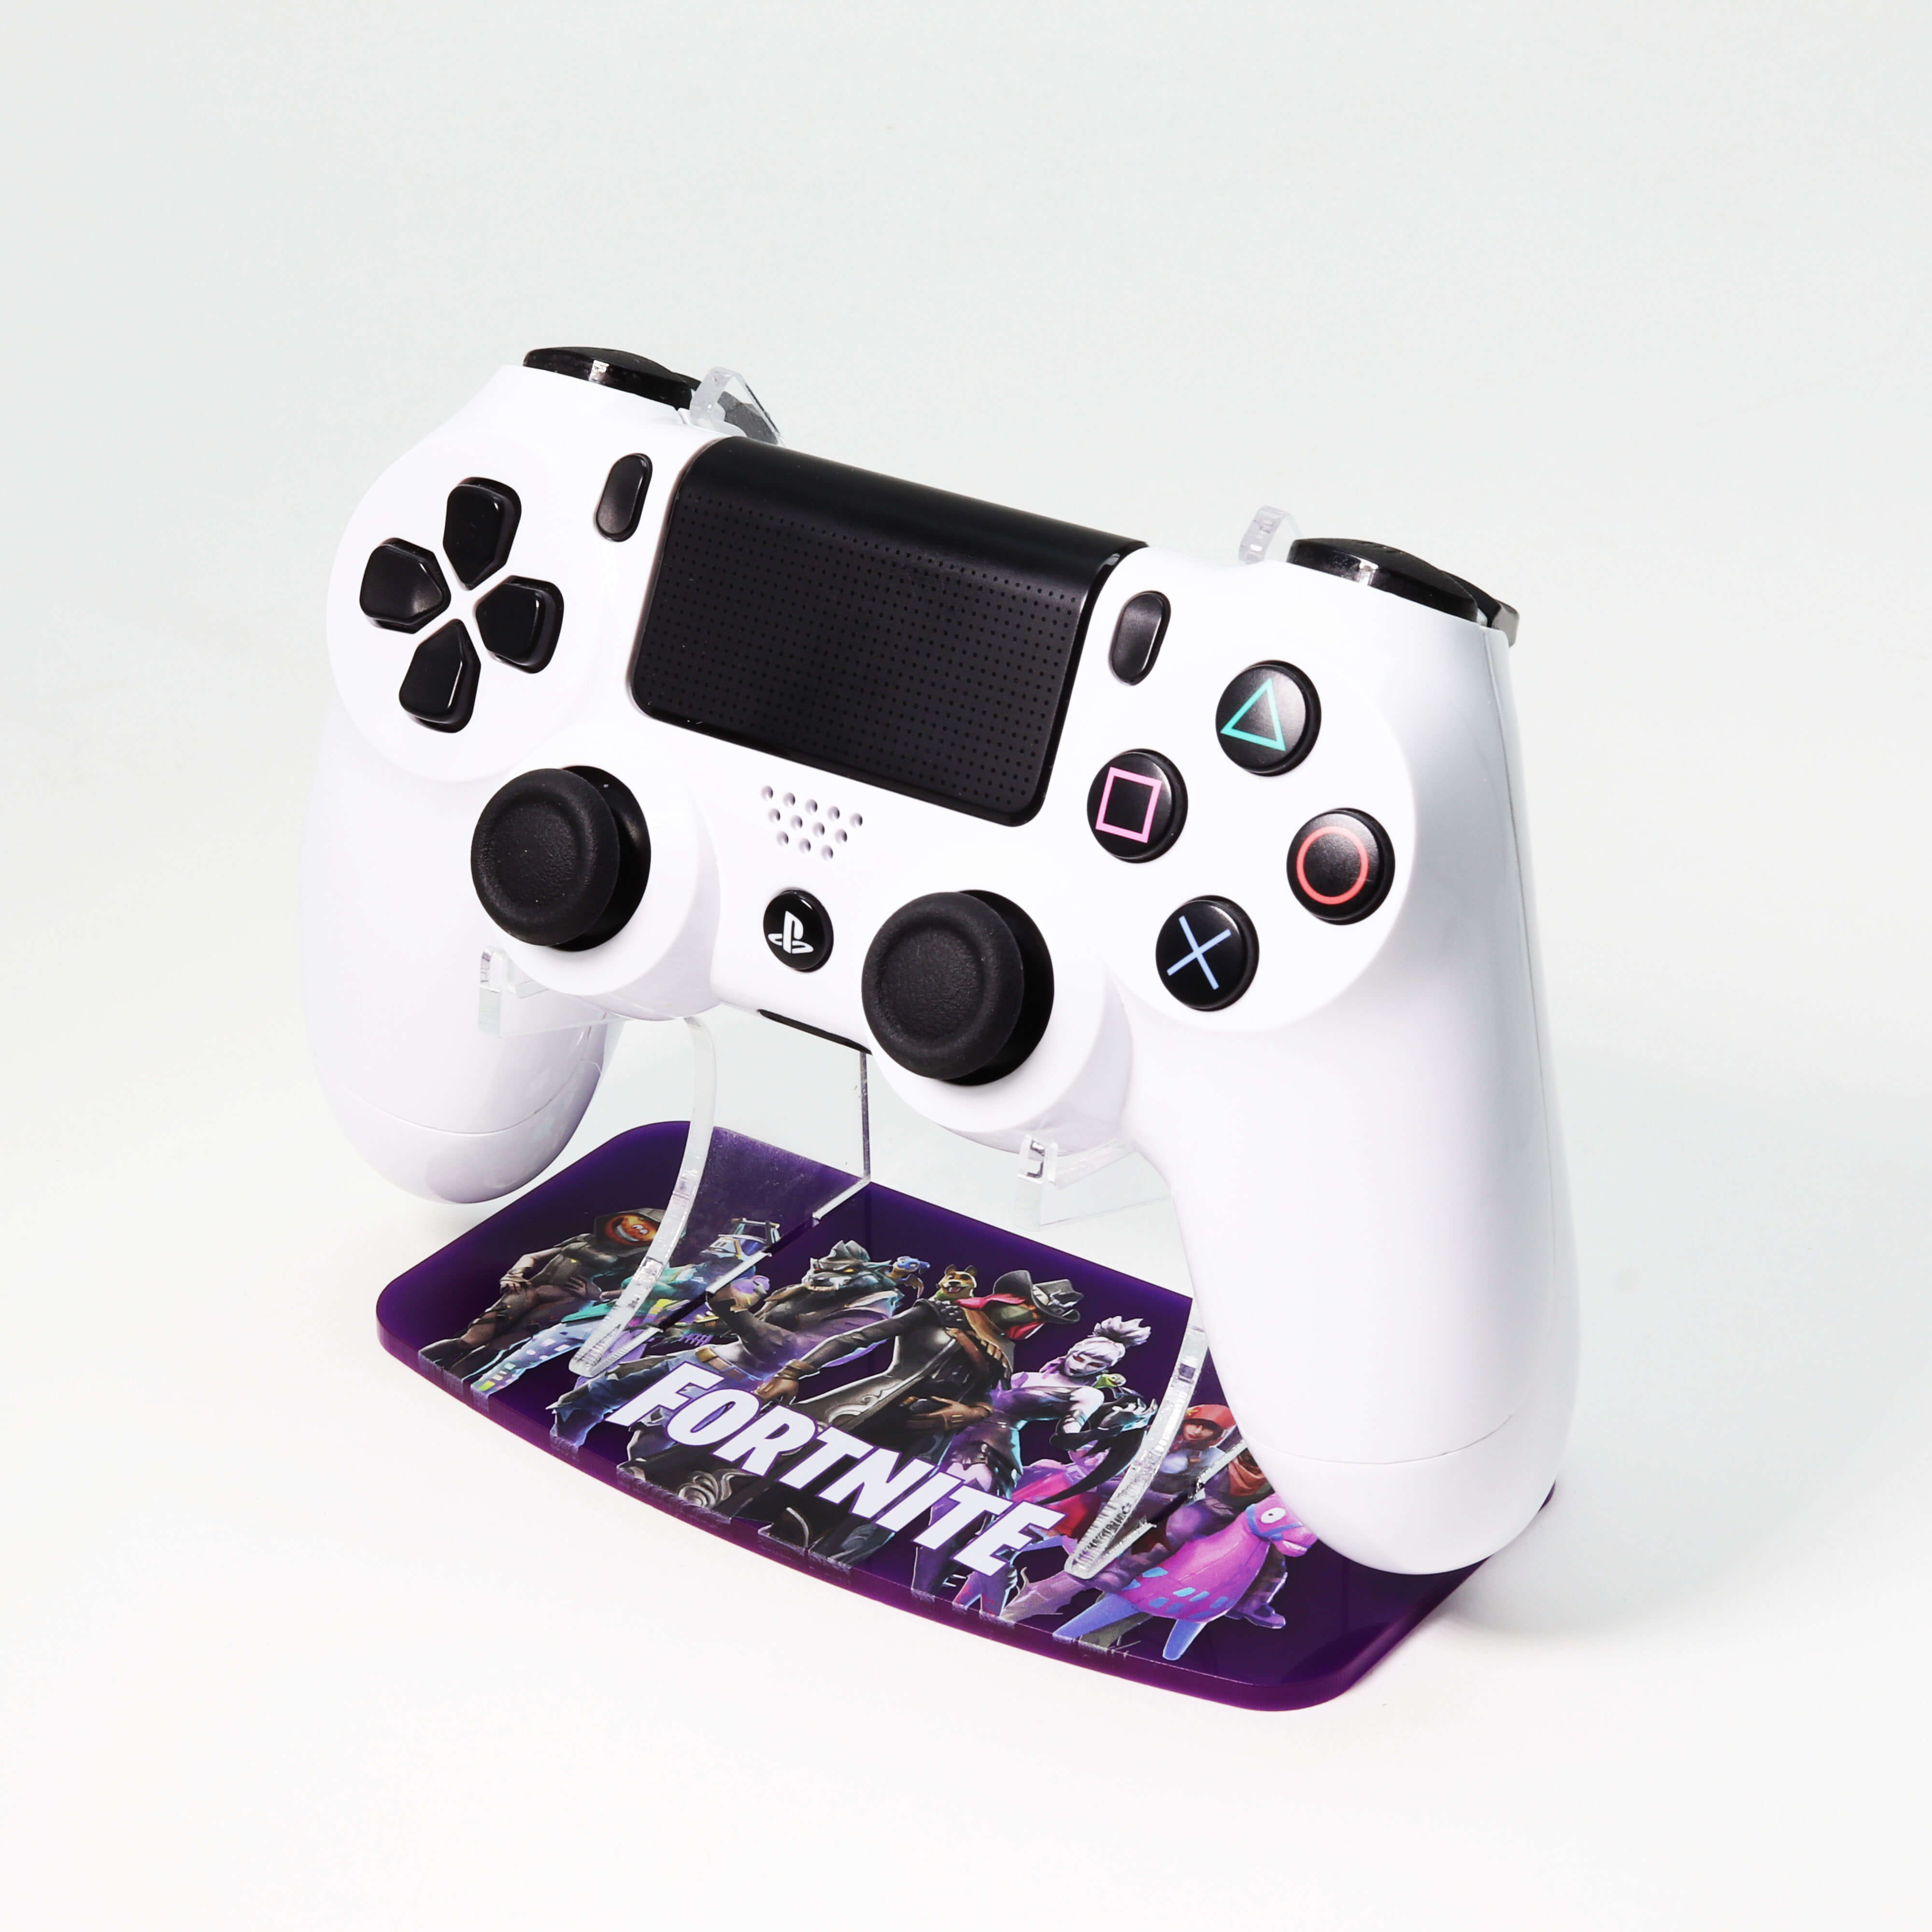 Fortnite Season 6 Playstation 4 Printed Controller Stand Gaming - fornite season 6 purple printed controller stand with characters and game title